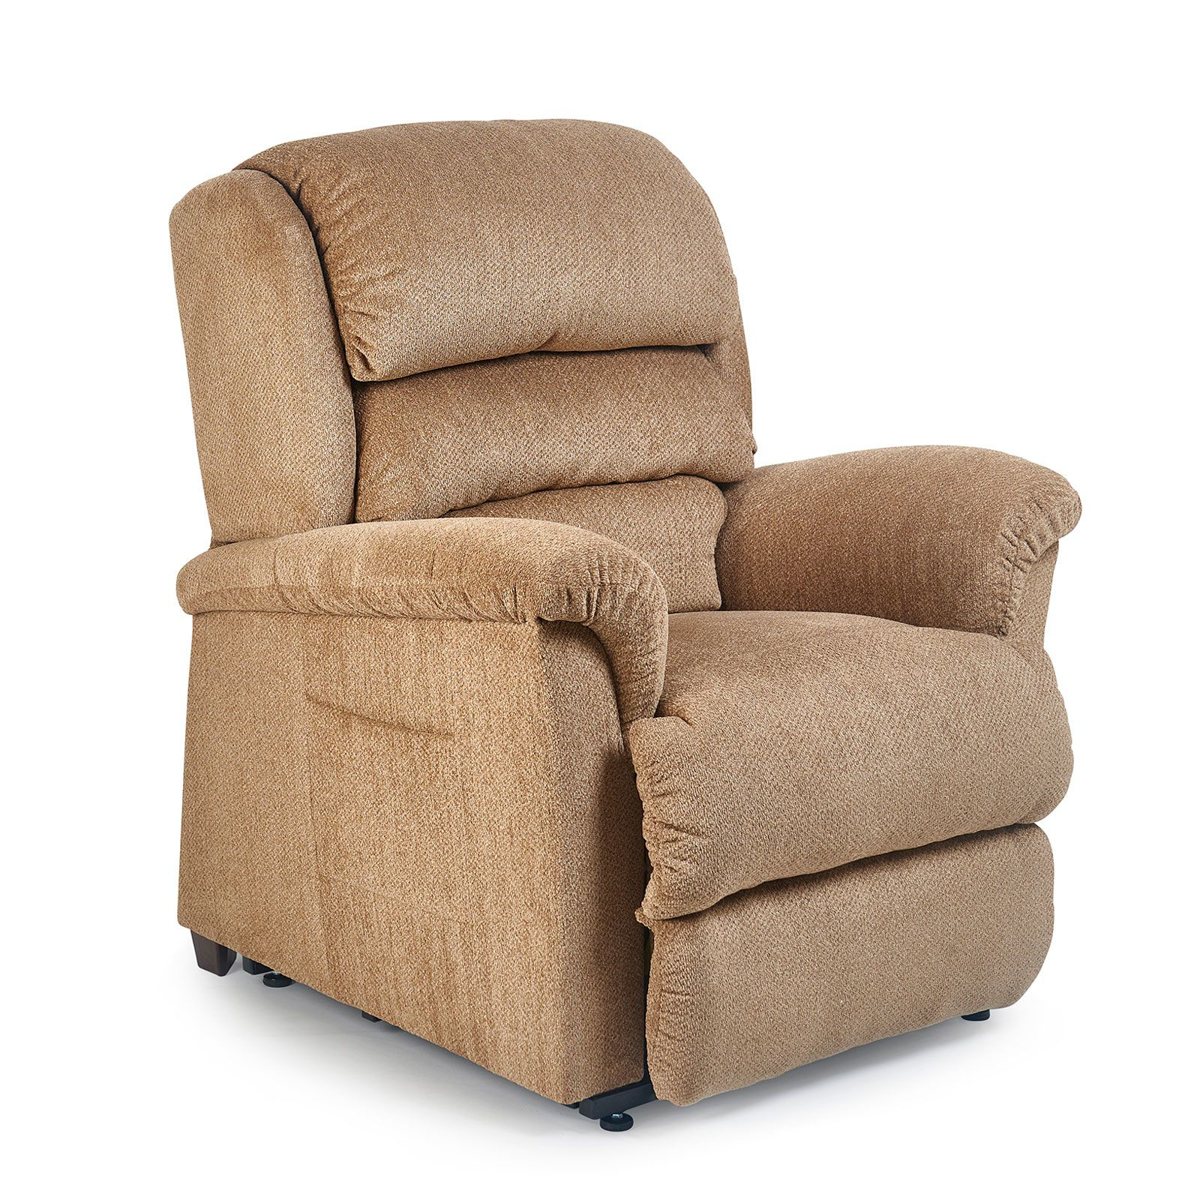 Picture of Polaris Wicker Large Lift Chair